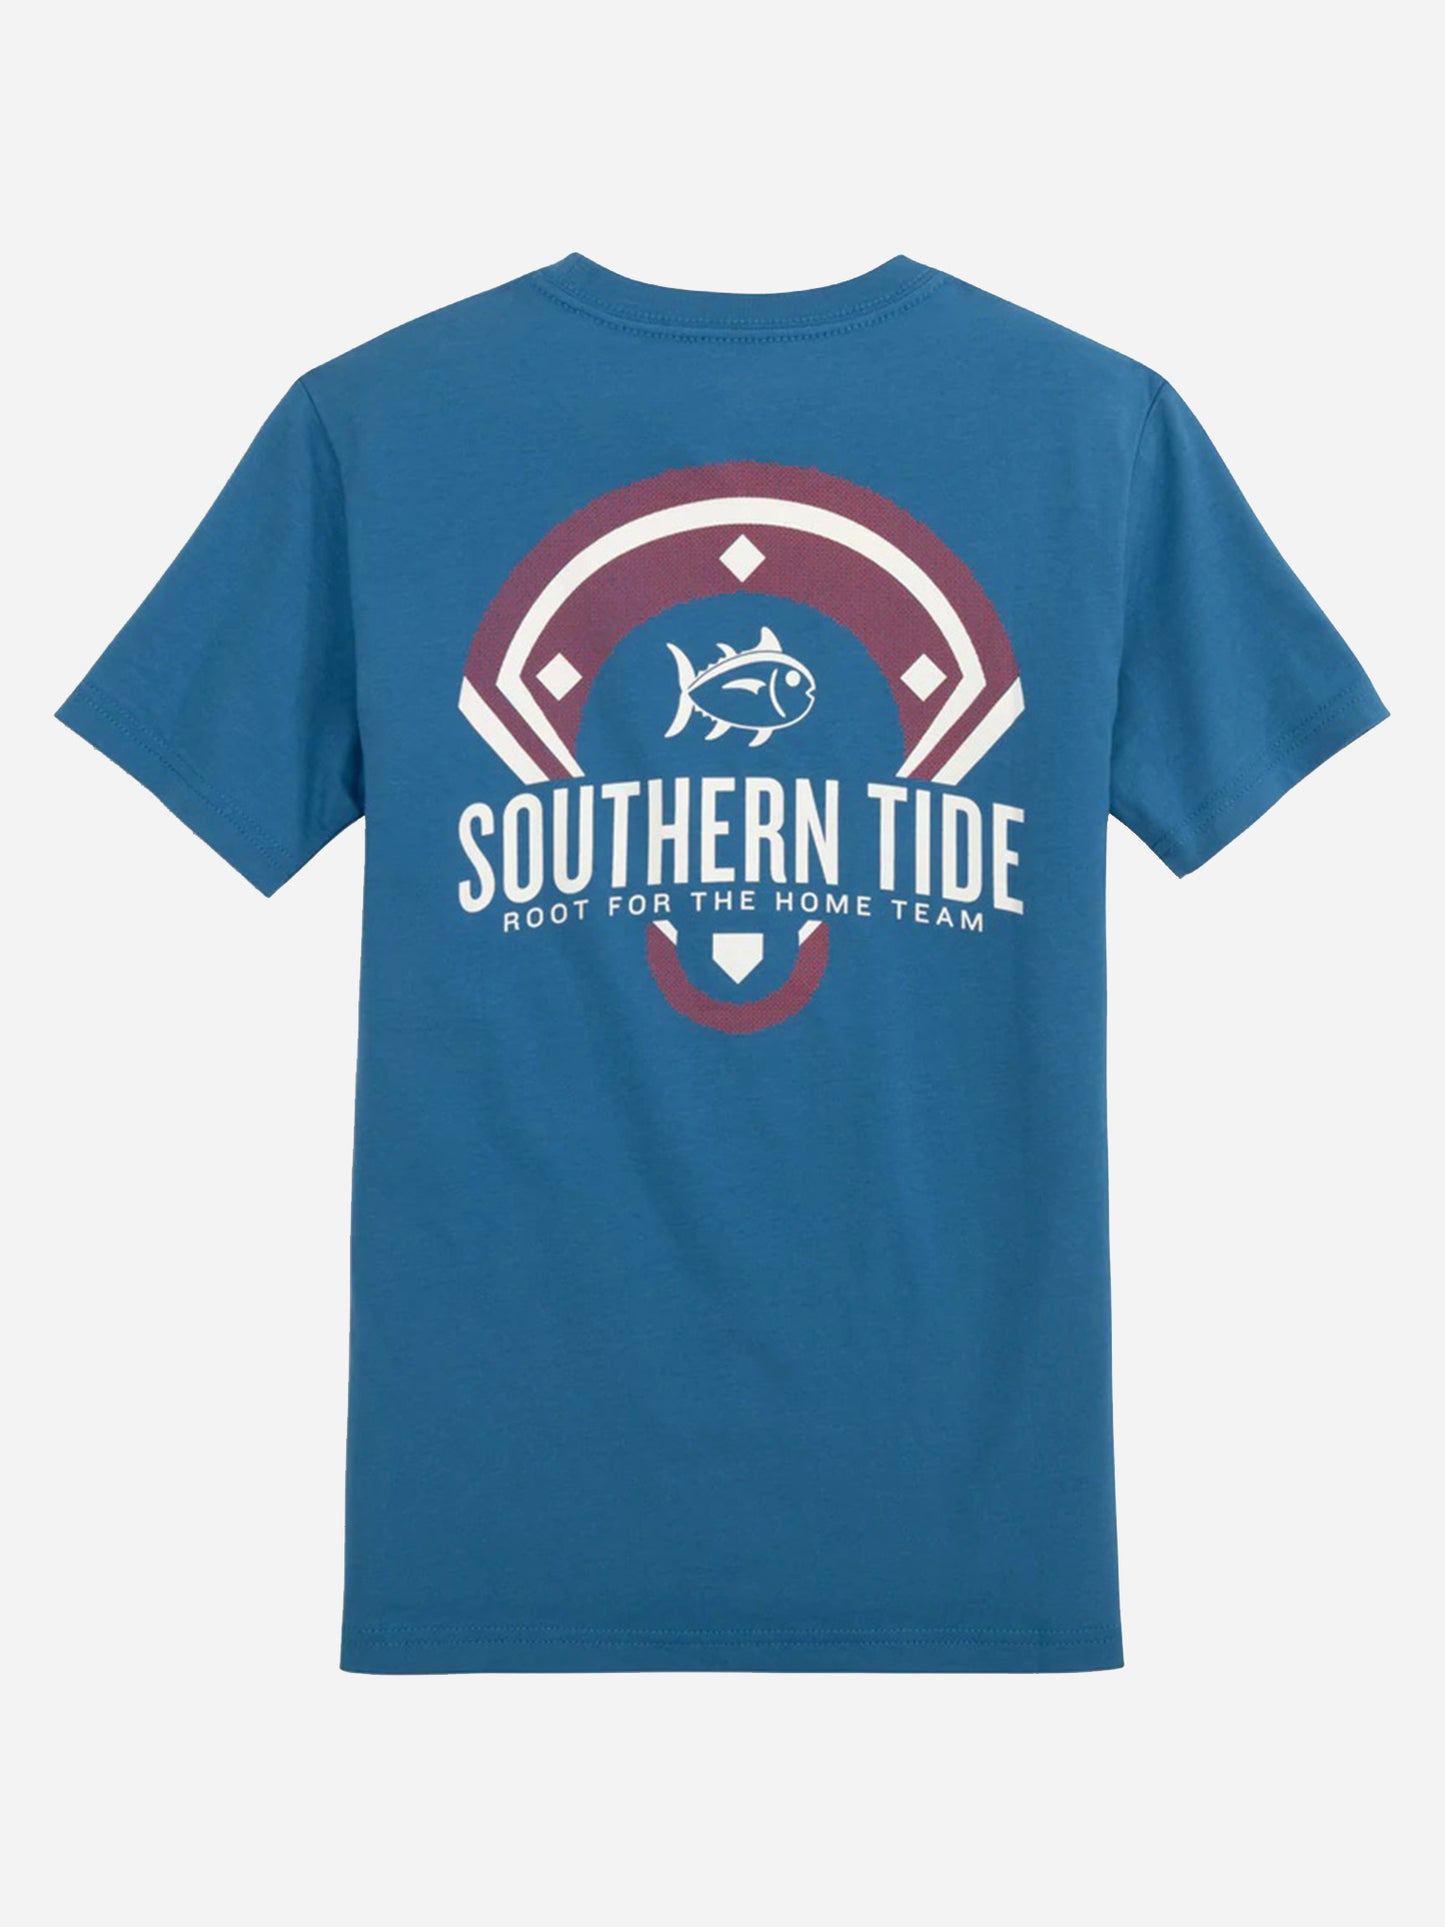 Southern Tide Boys' Root For The Home Team T-Shirt